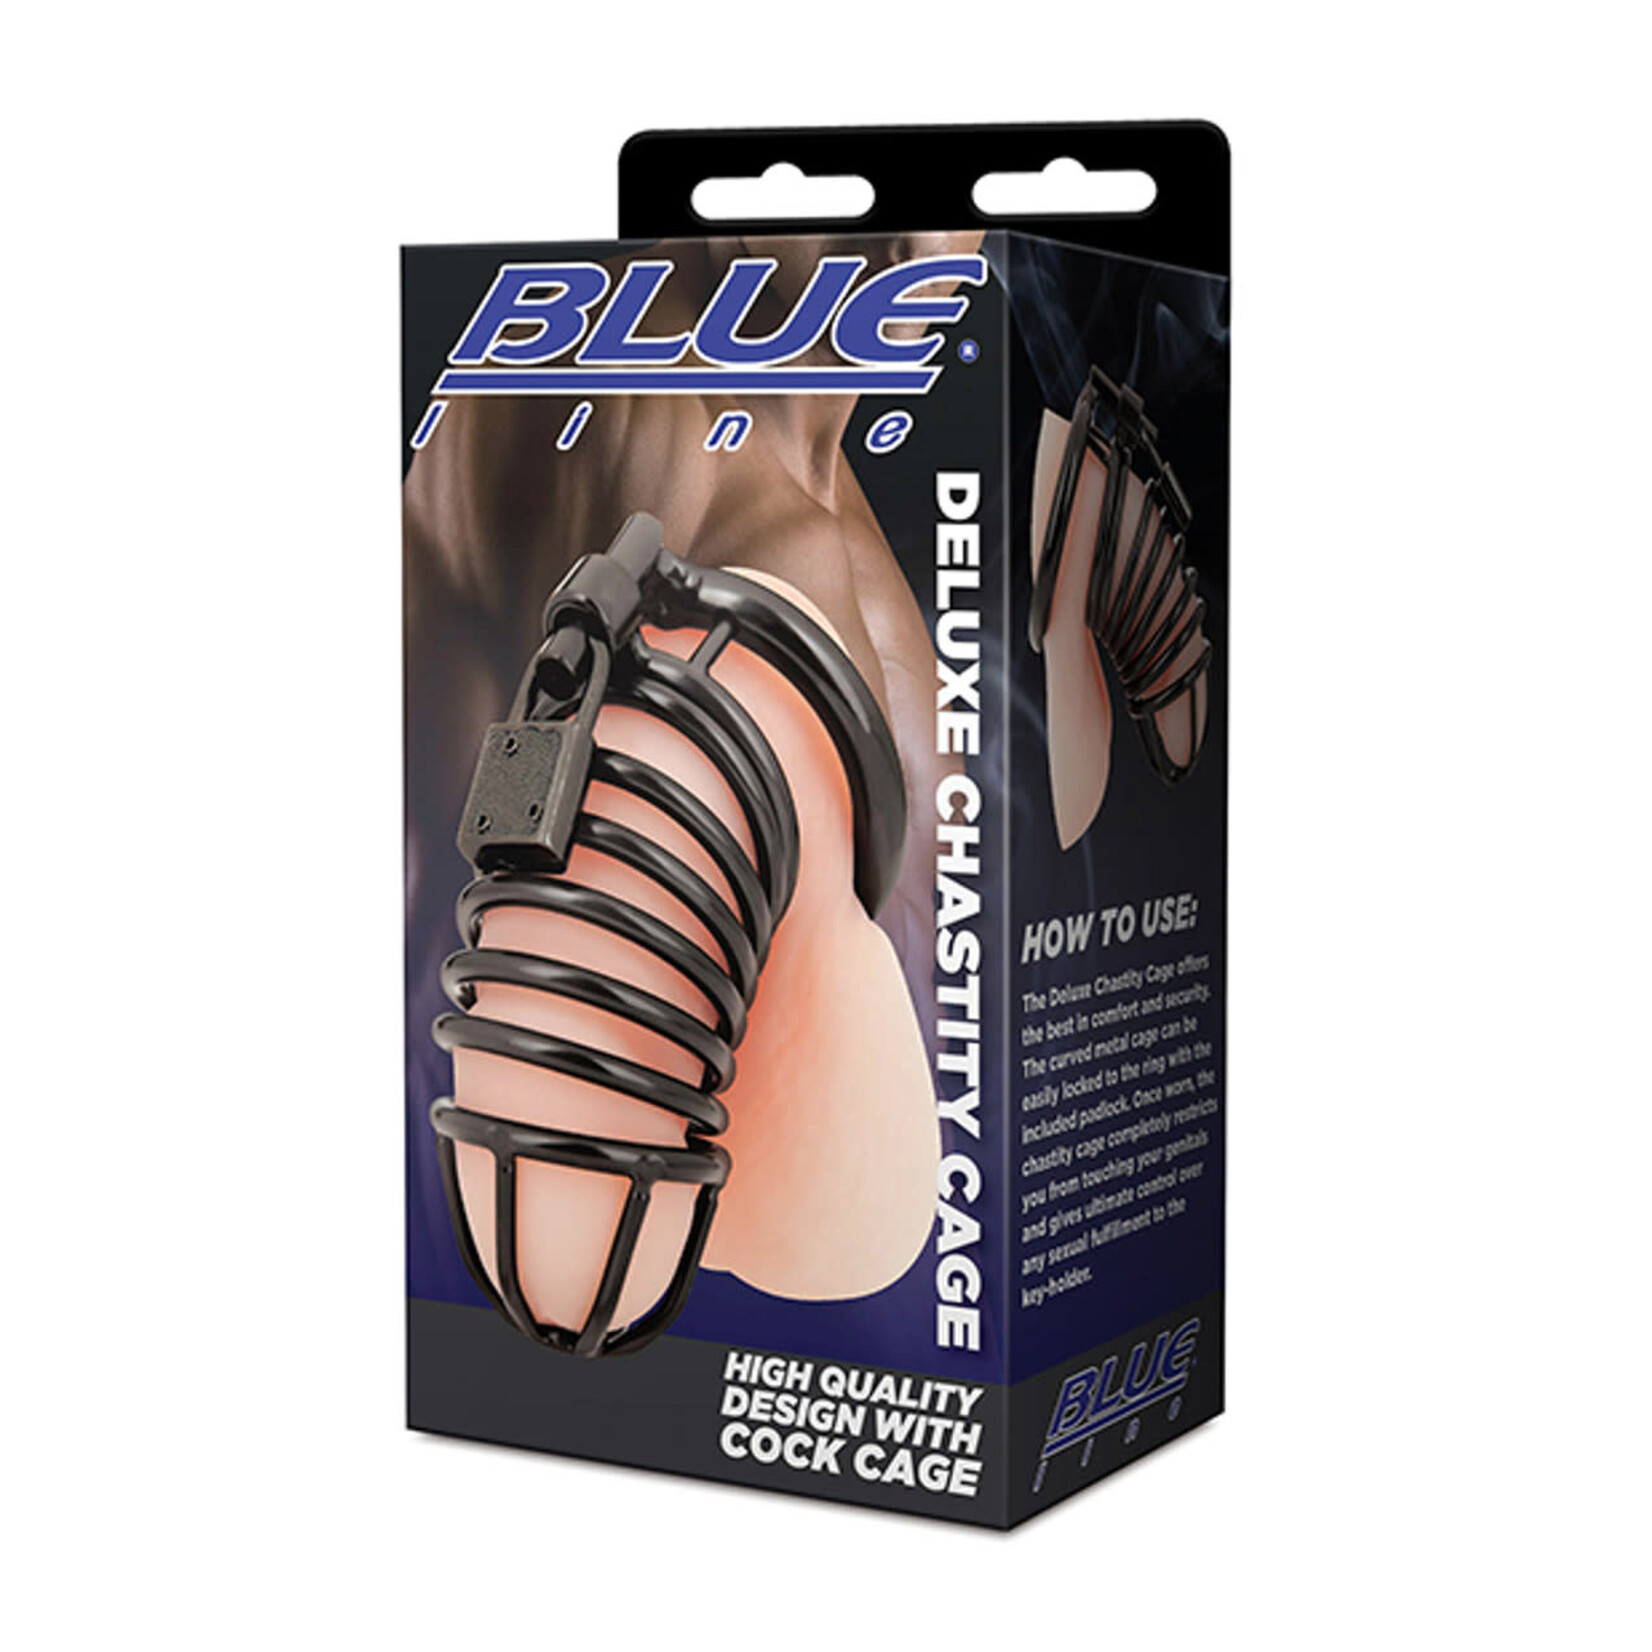 BLUE LINE DELUXE STEEL CHASTITY CAGE IN BLACK